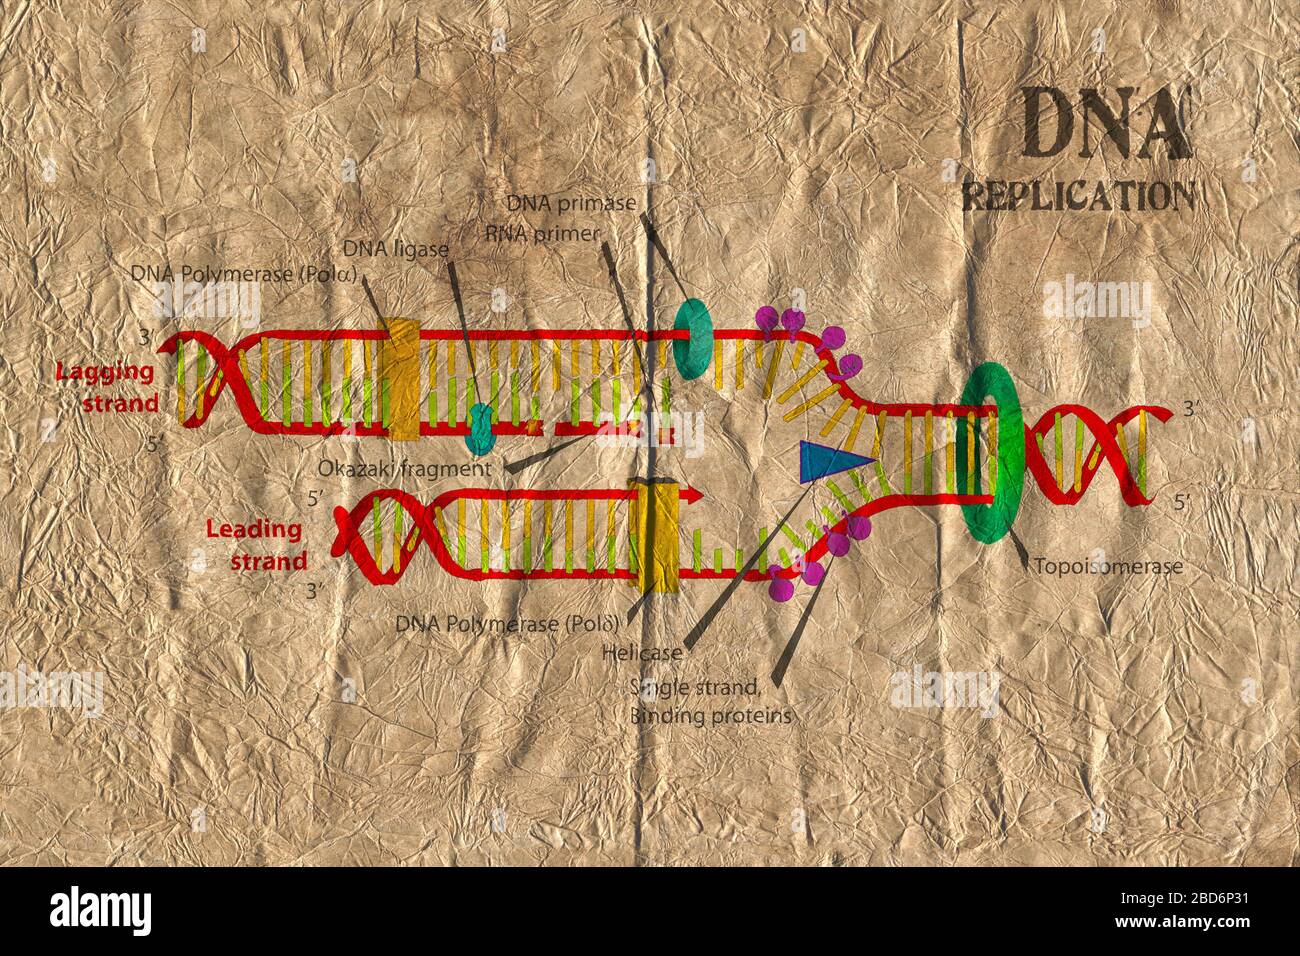 DNA replication schematics diagram on very old paper texture. Stock Photo